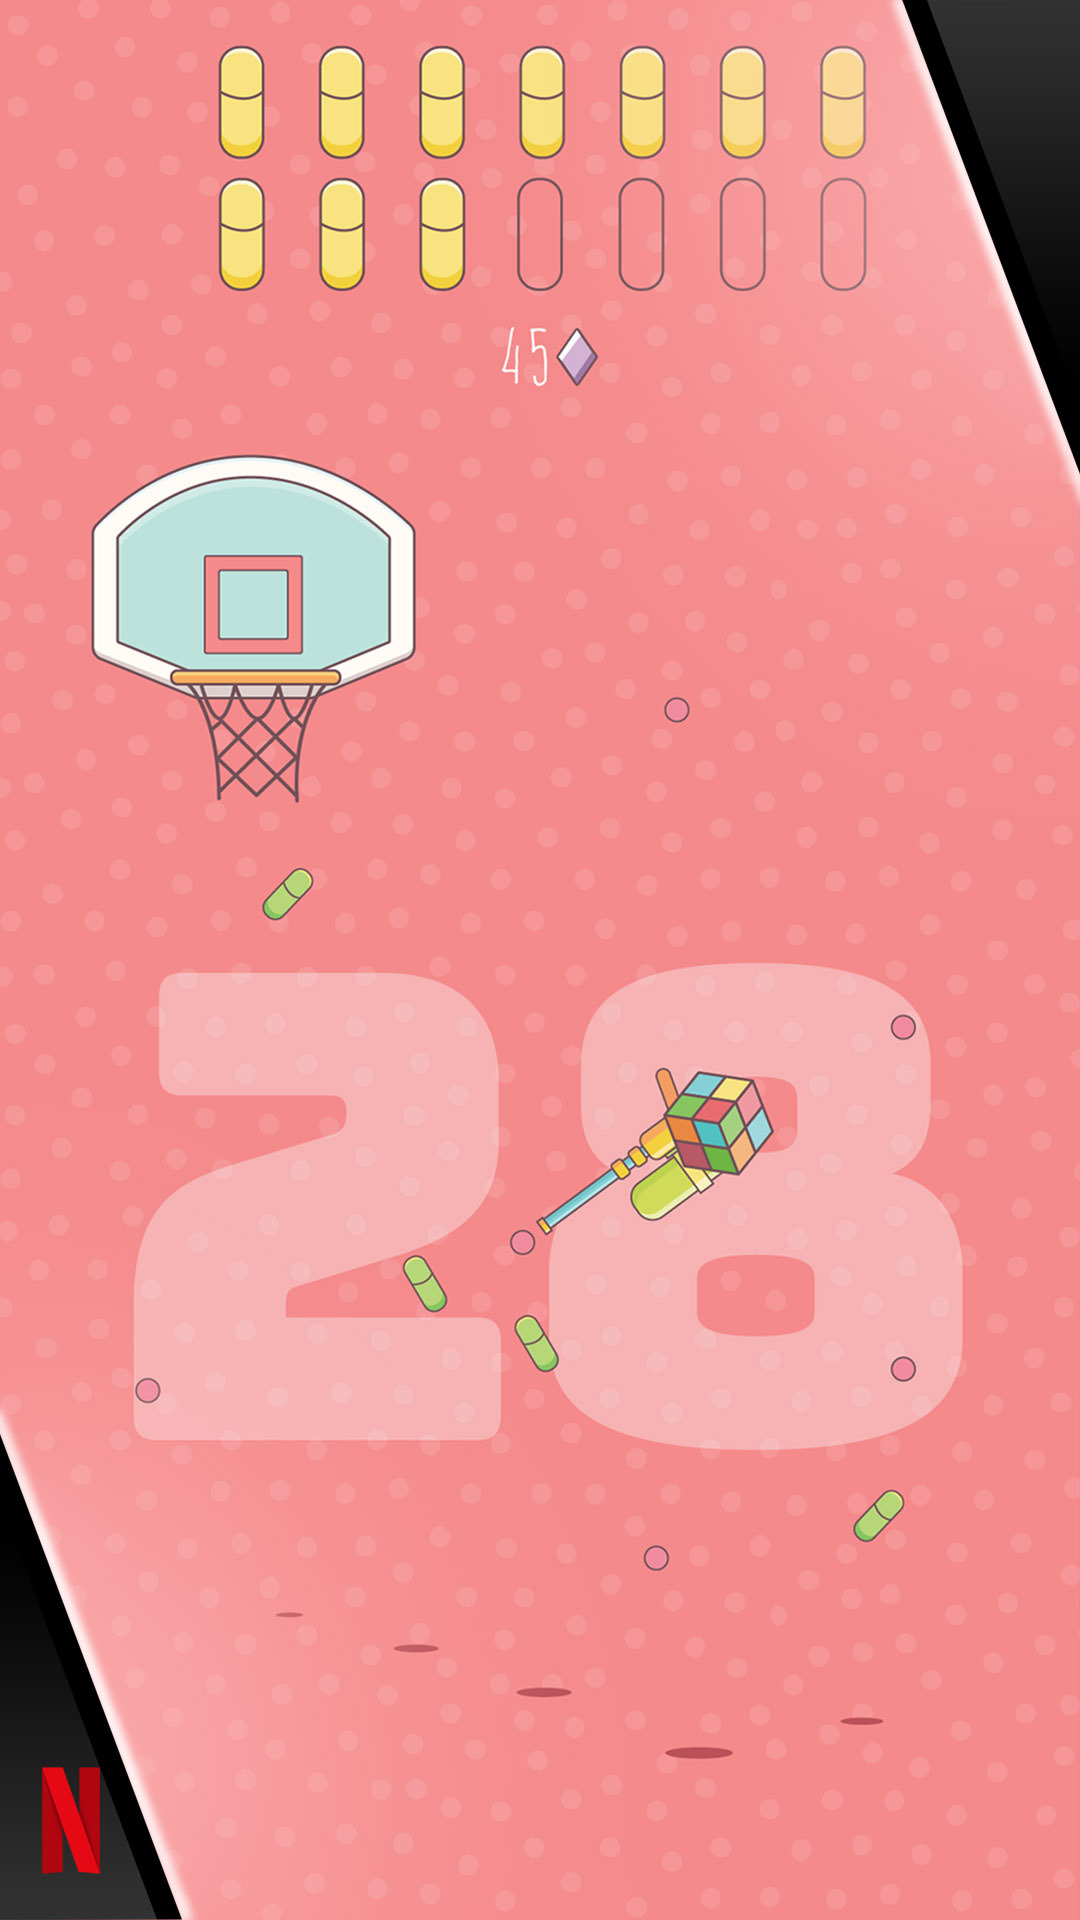 Gameplay of the Shooting Hoops for Android phone or tablet.